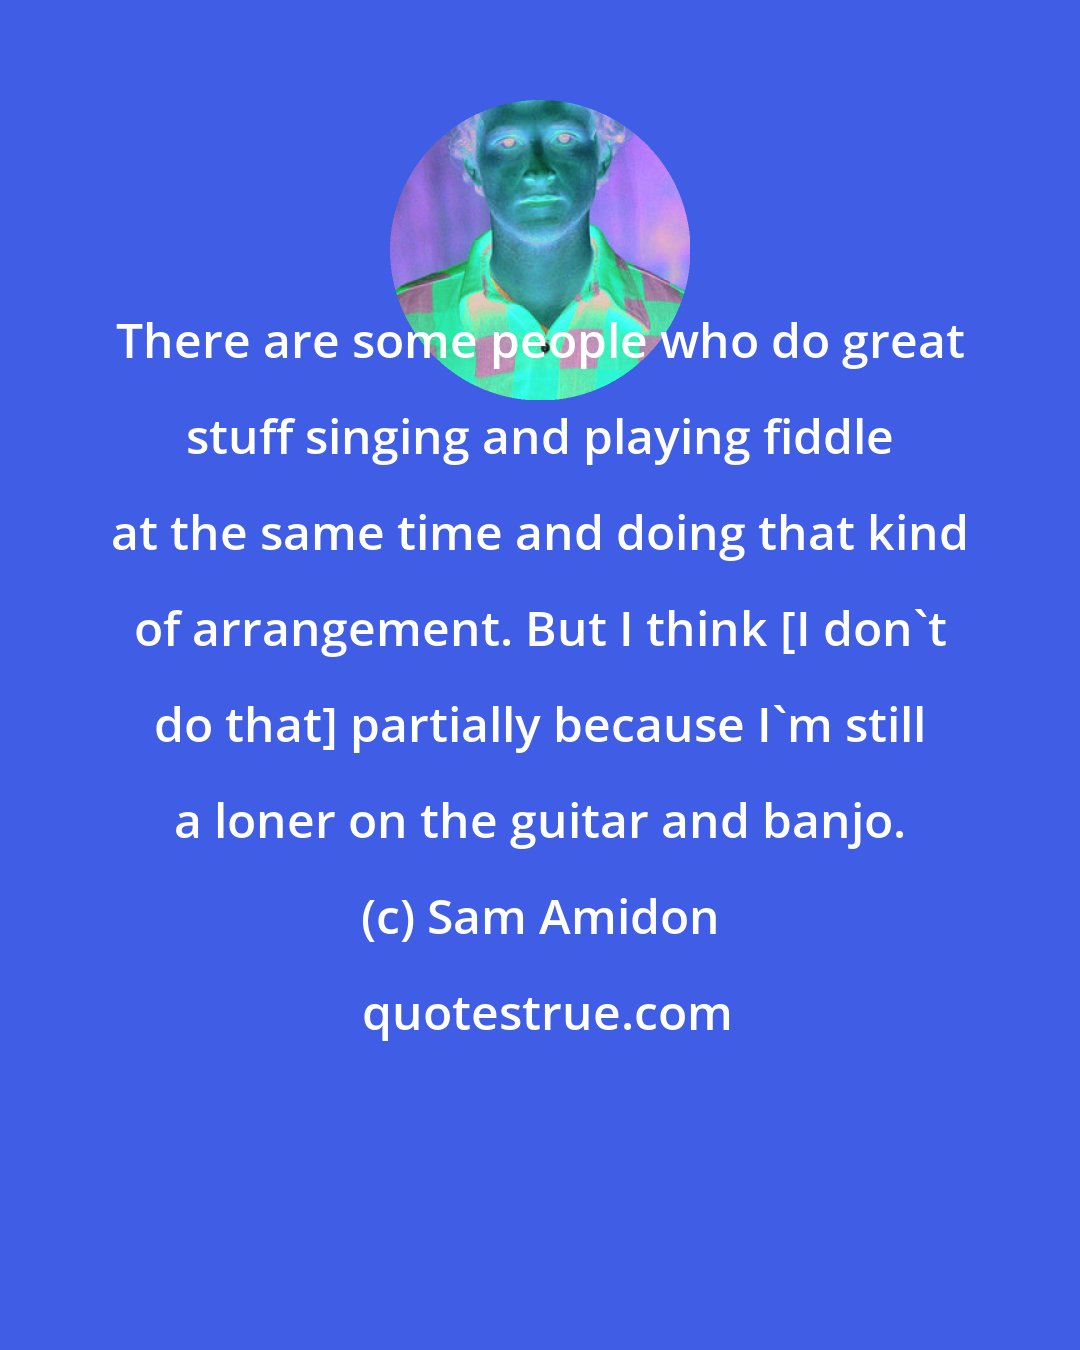 Sam Amidon: There are some people who do great stuff singing and playing fiddle at the same time and doing that kind of arrangement. But I think [I don't do that] partially because I'm still a loner on the guitar and banjo.